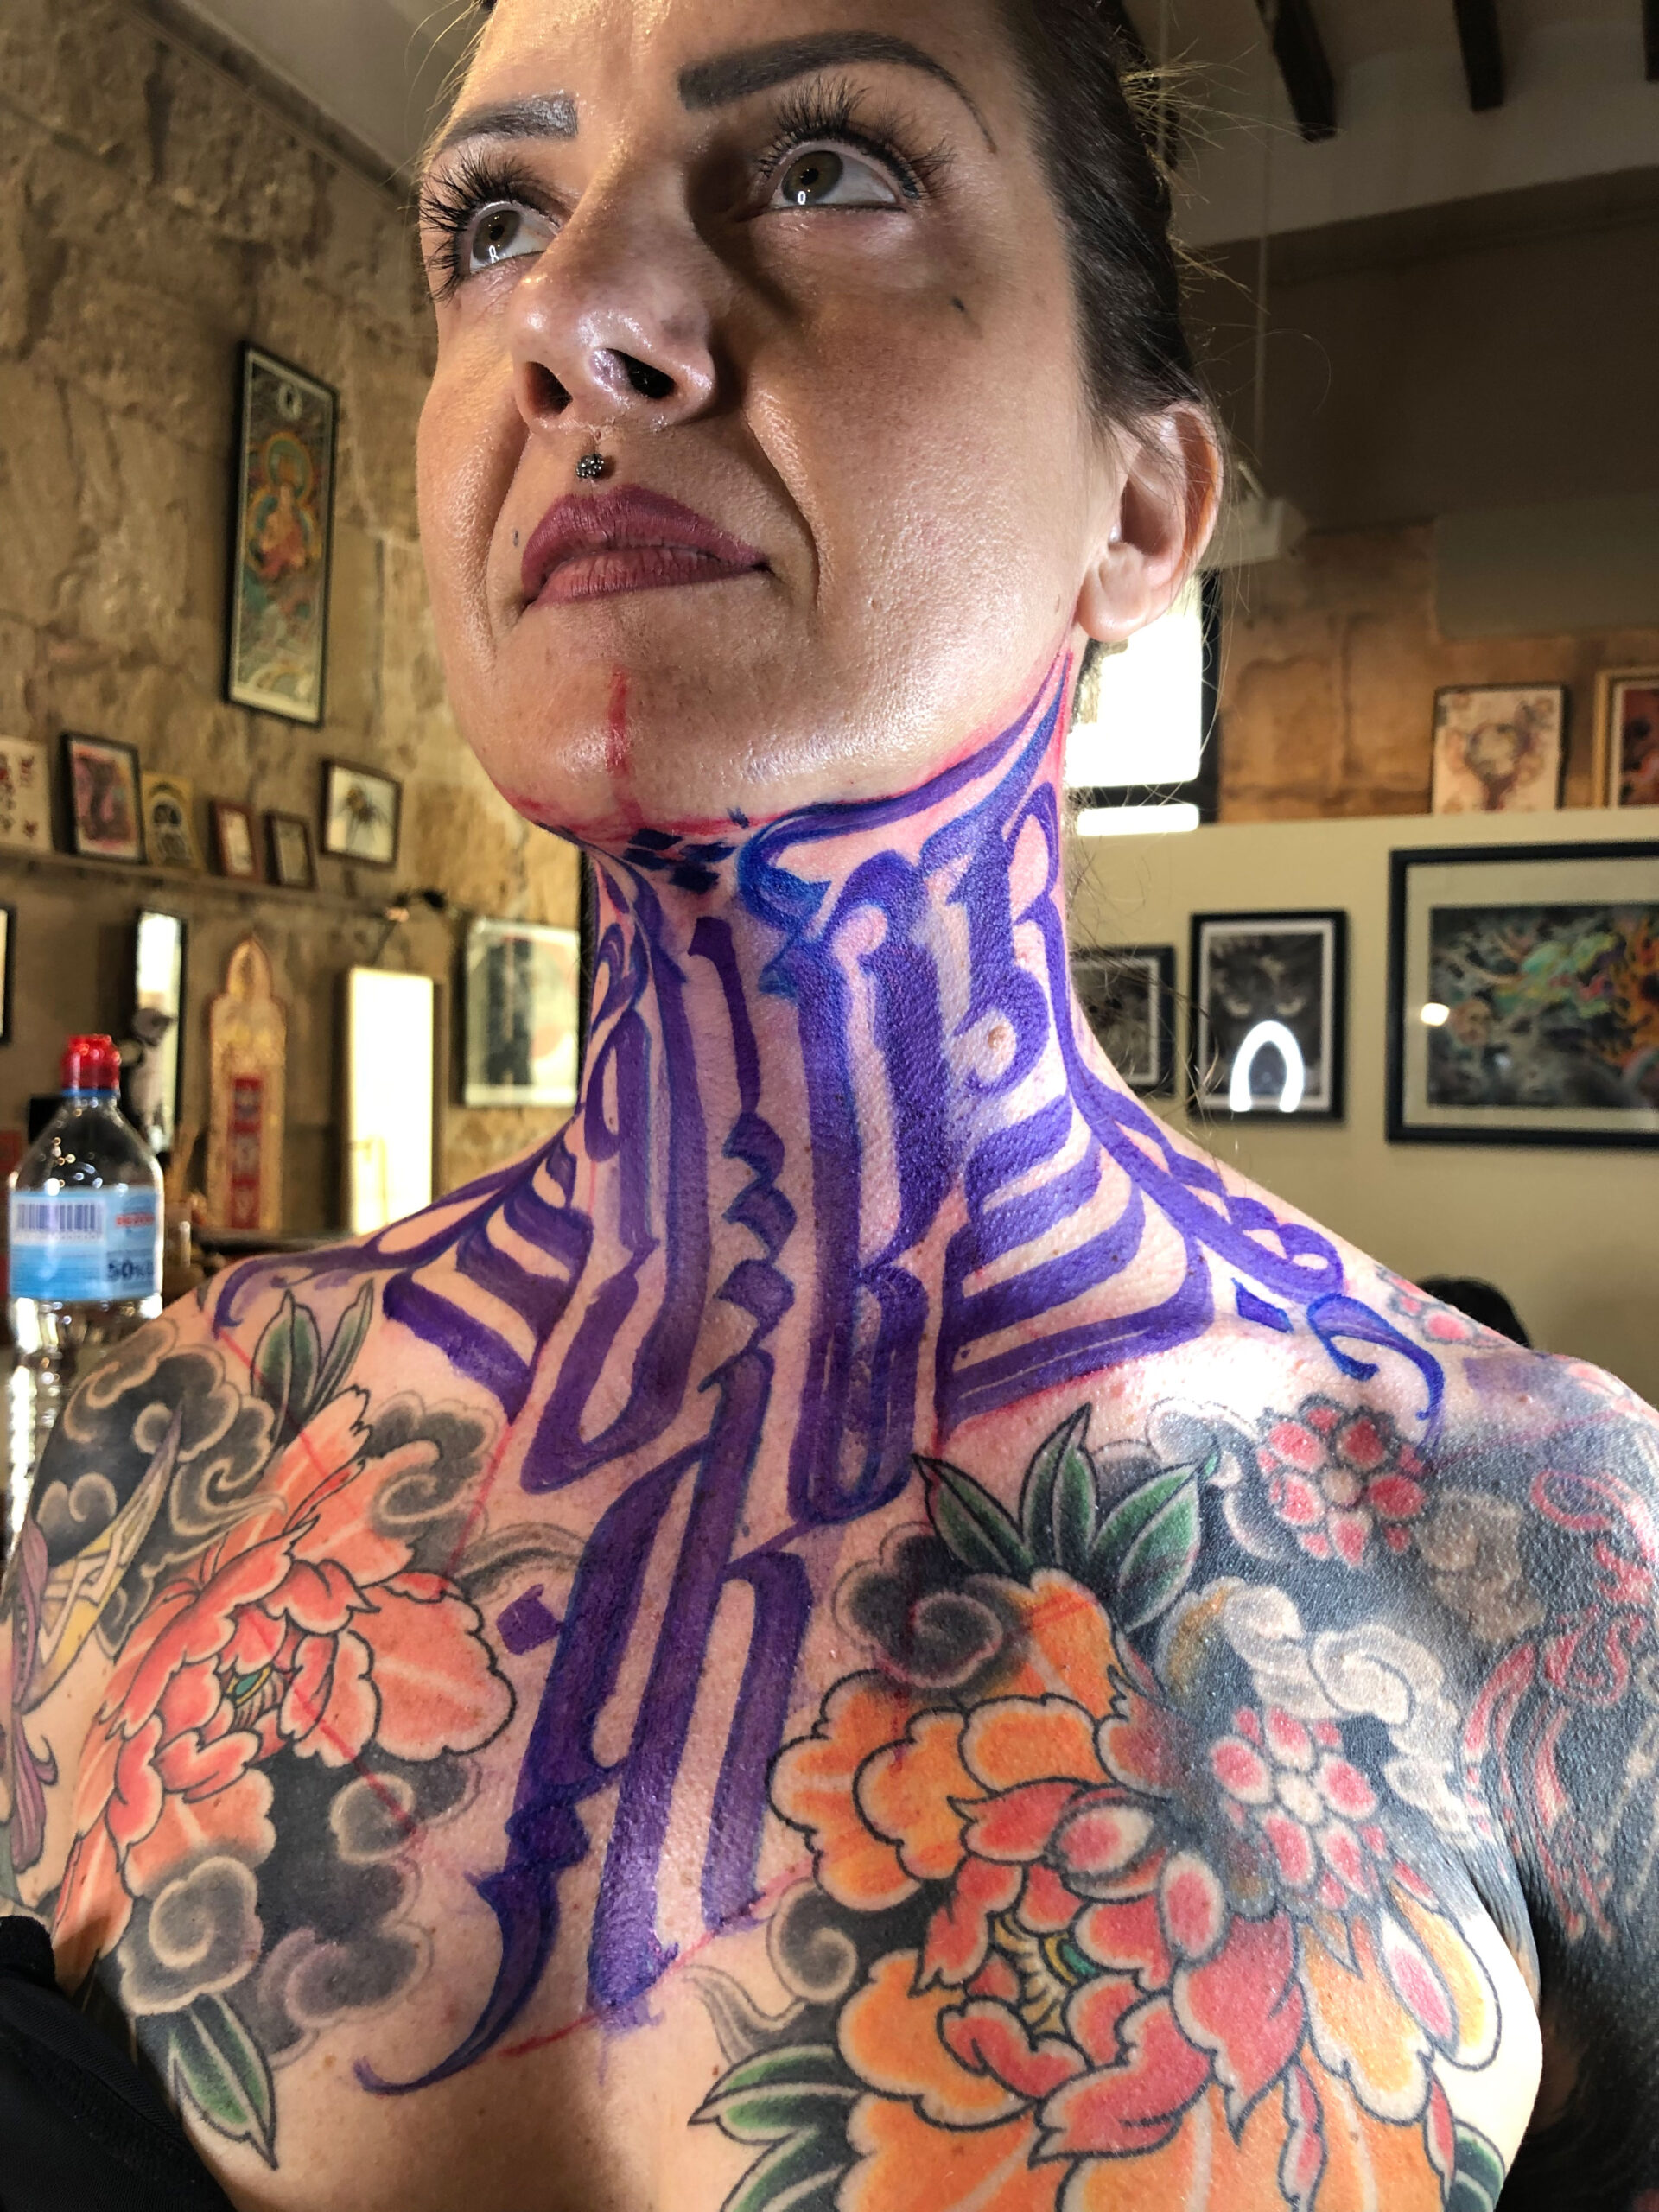 19 Classy Neck Tattoo Ideas & 46 Examples / Style Dieter